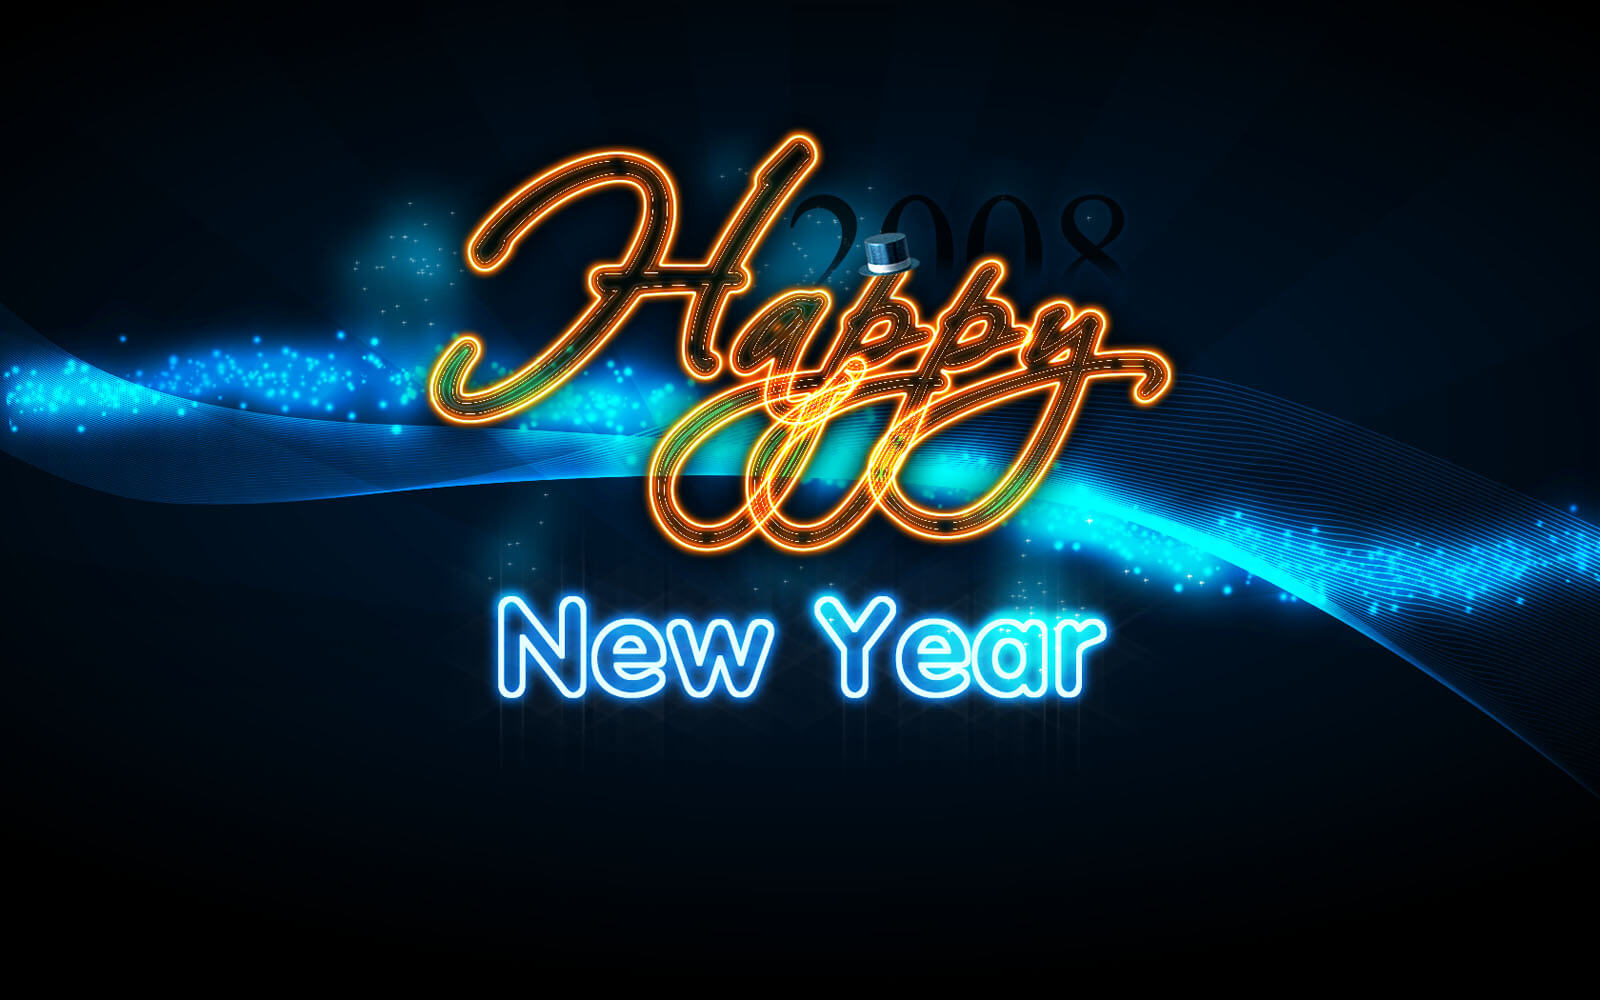 New Year Greeting Cards - Happy New Year Flashing Lights - HD Wallpaper 